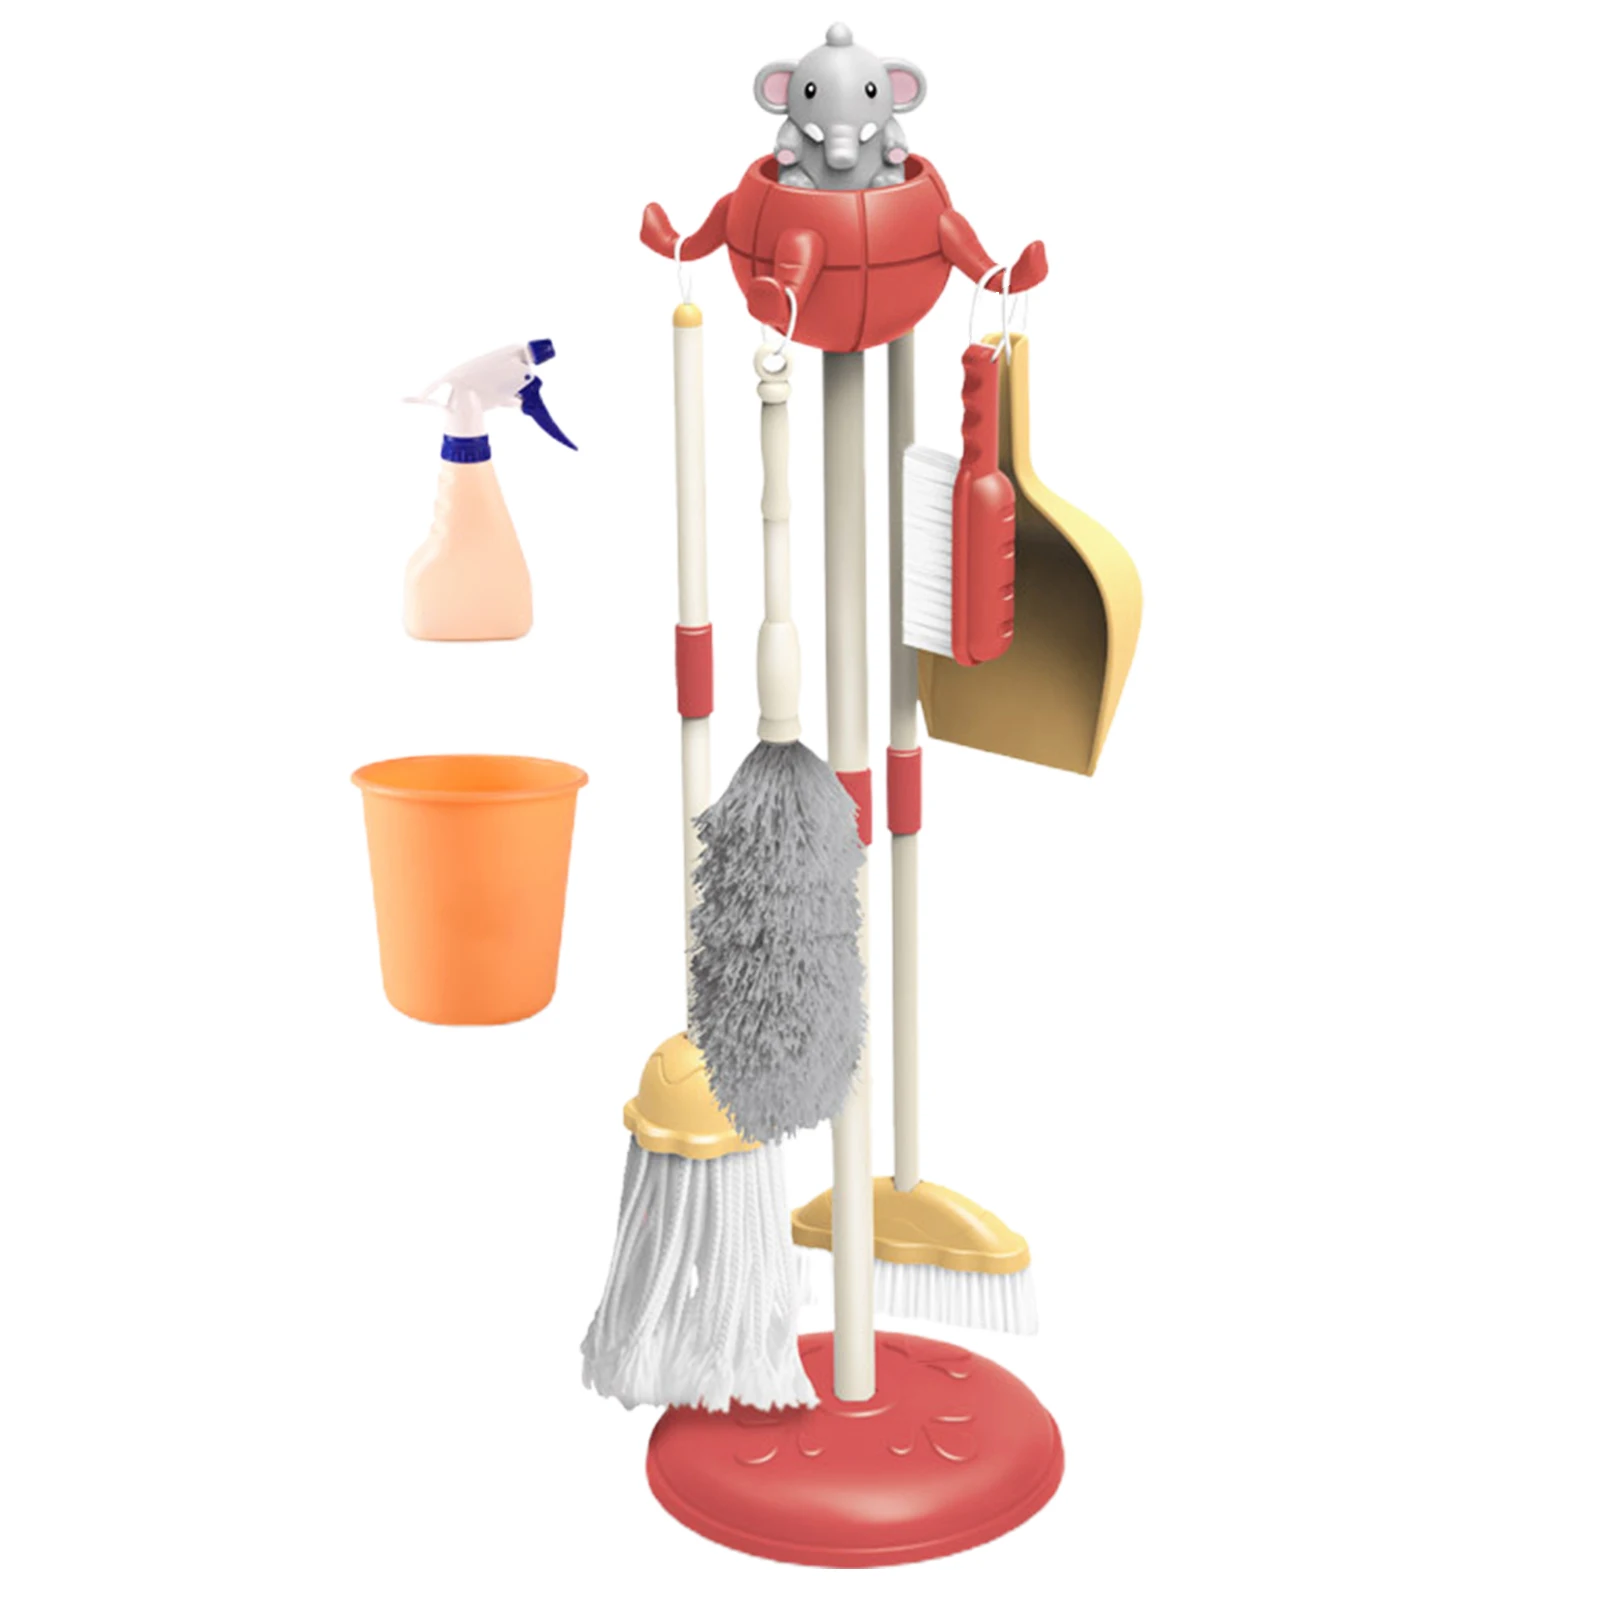 Children Simulation Mop Broom Dustpan Cleaning Tool Set Play House Role Play Toy chridern cleaning tools plastic play trolley childrens brush broom toddler house toddlers baby role dustpan room mop